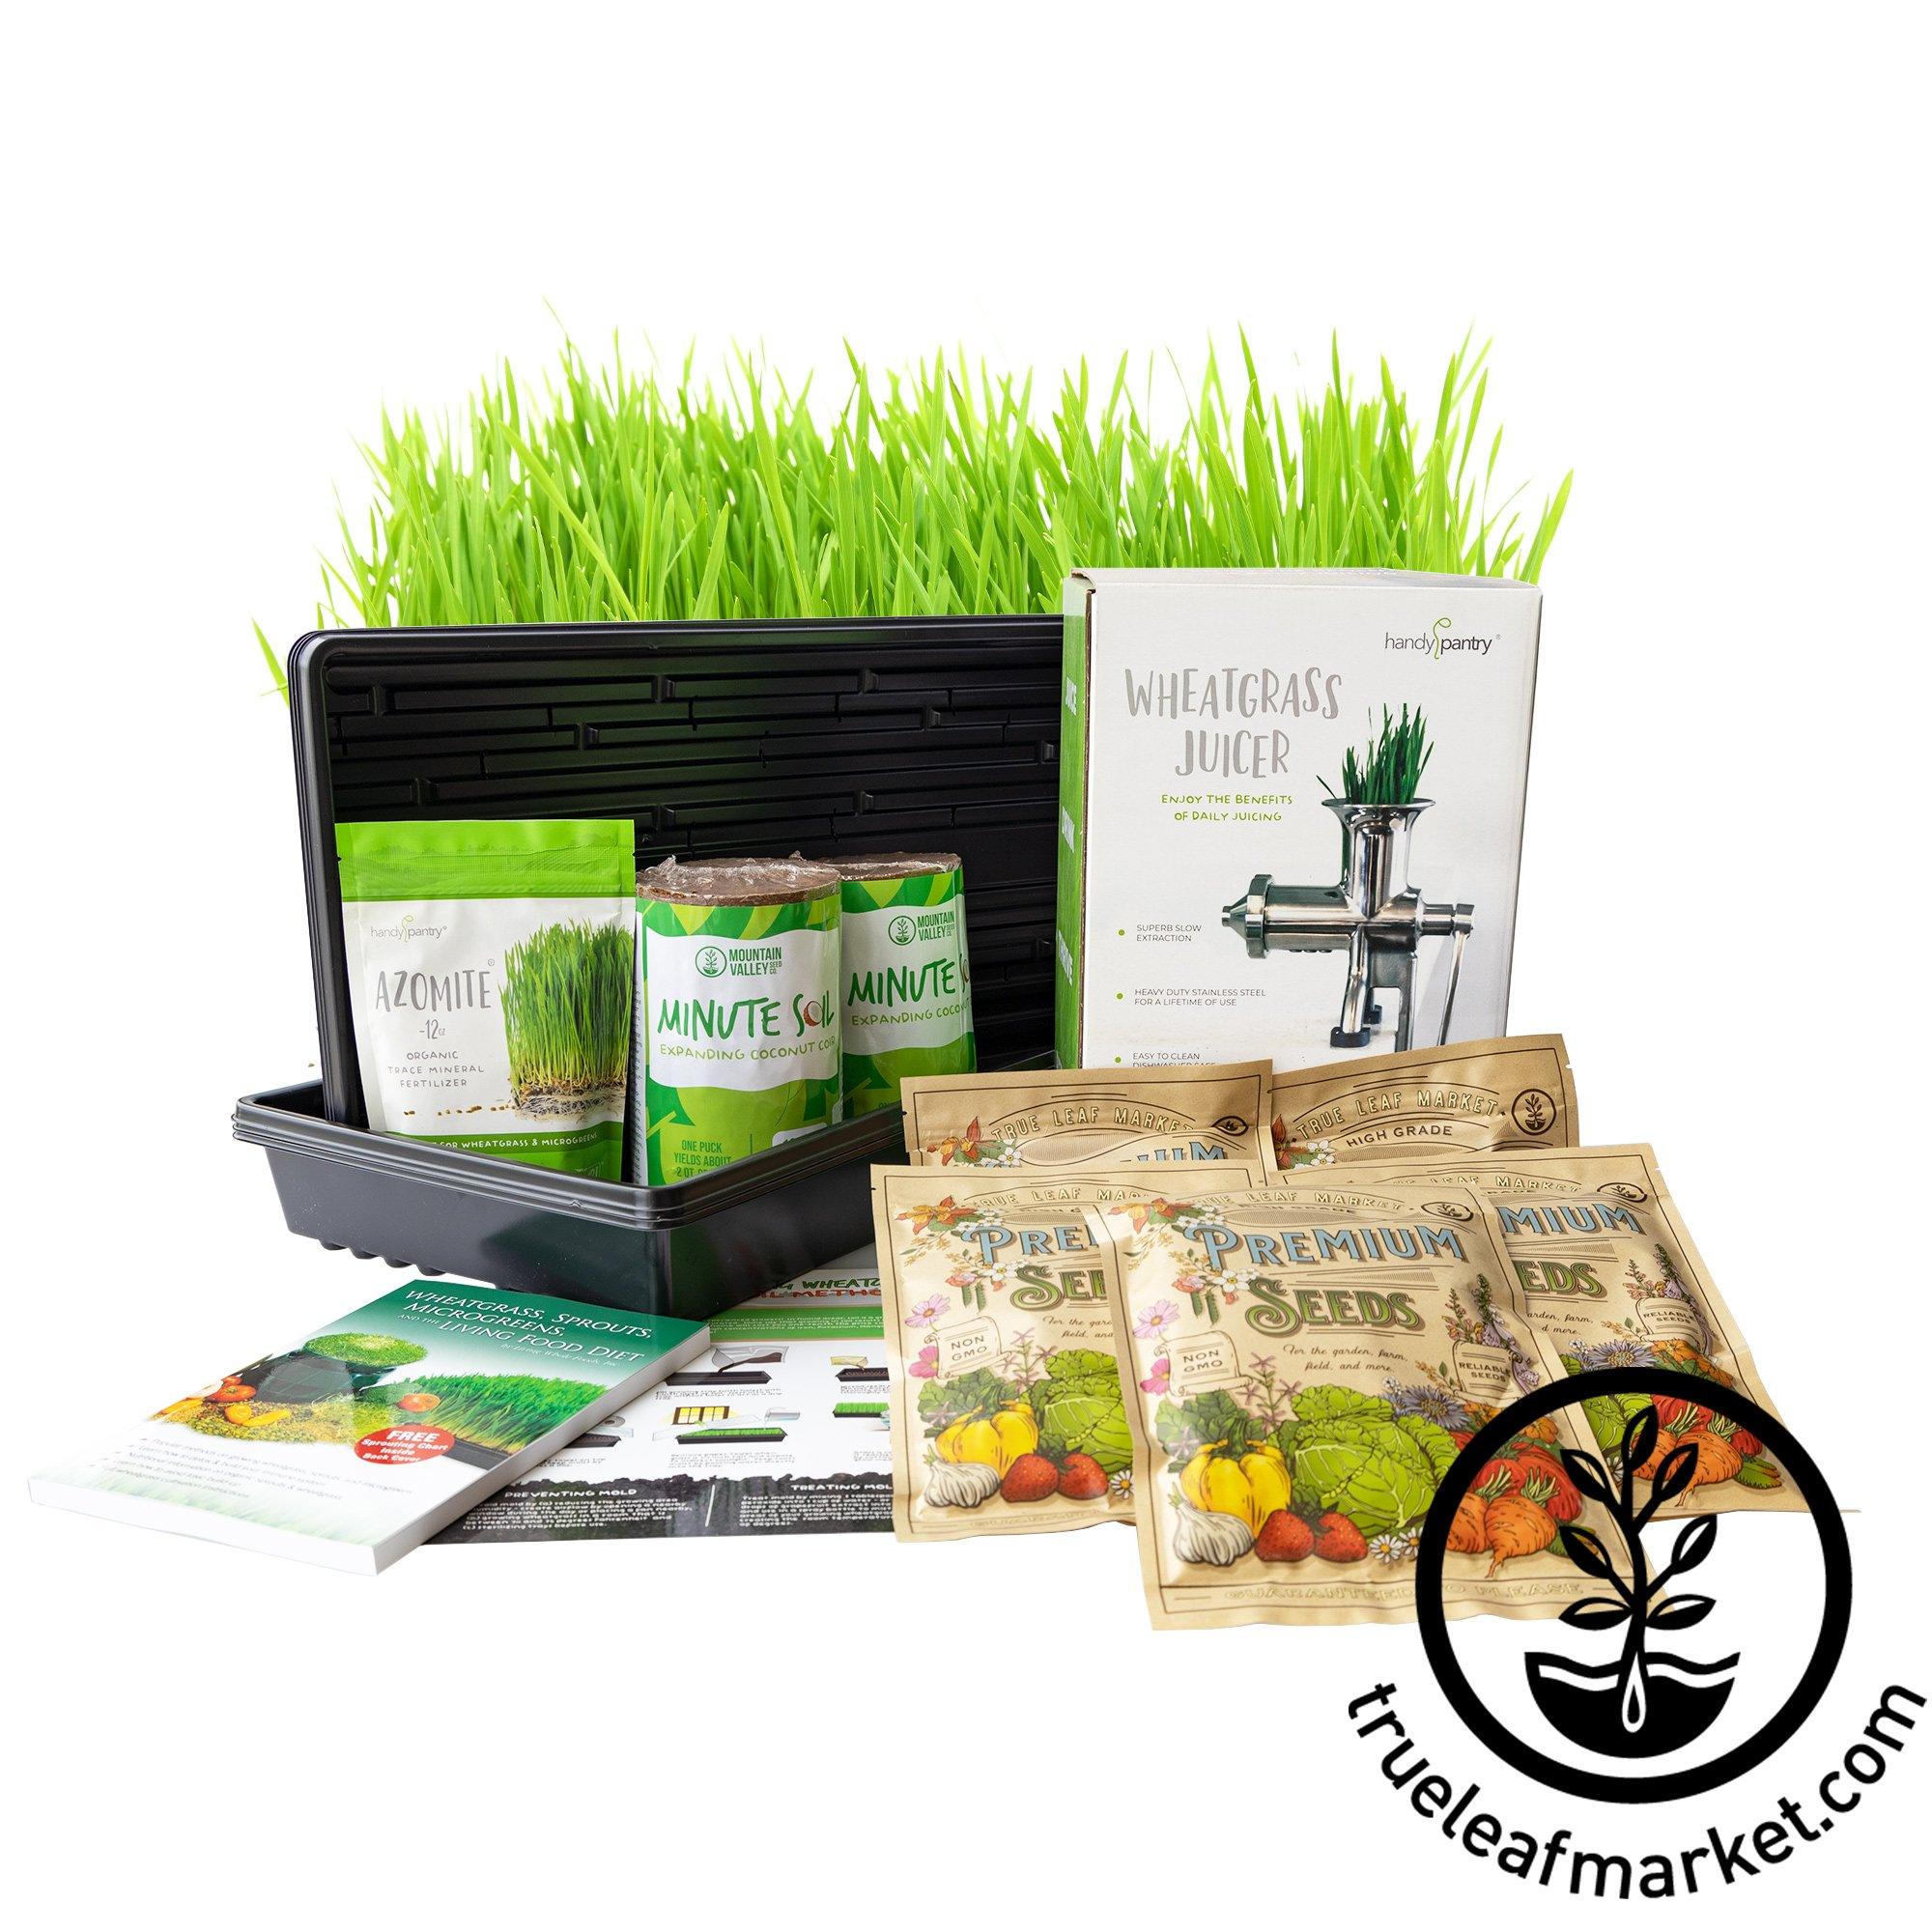 by Manual Steel Leaf Wheatgrass | Stainless Juicer Handy Company Seed Hurricane Pantry Market True